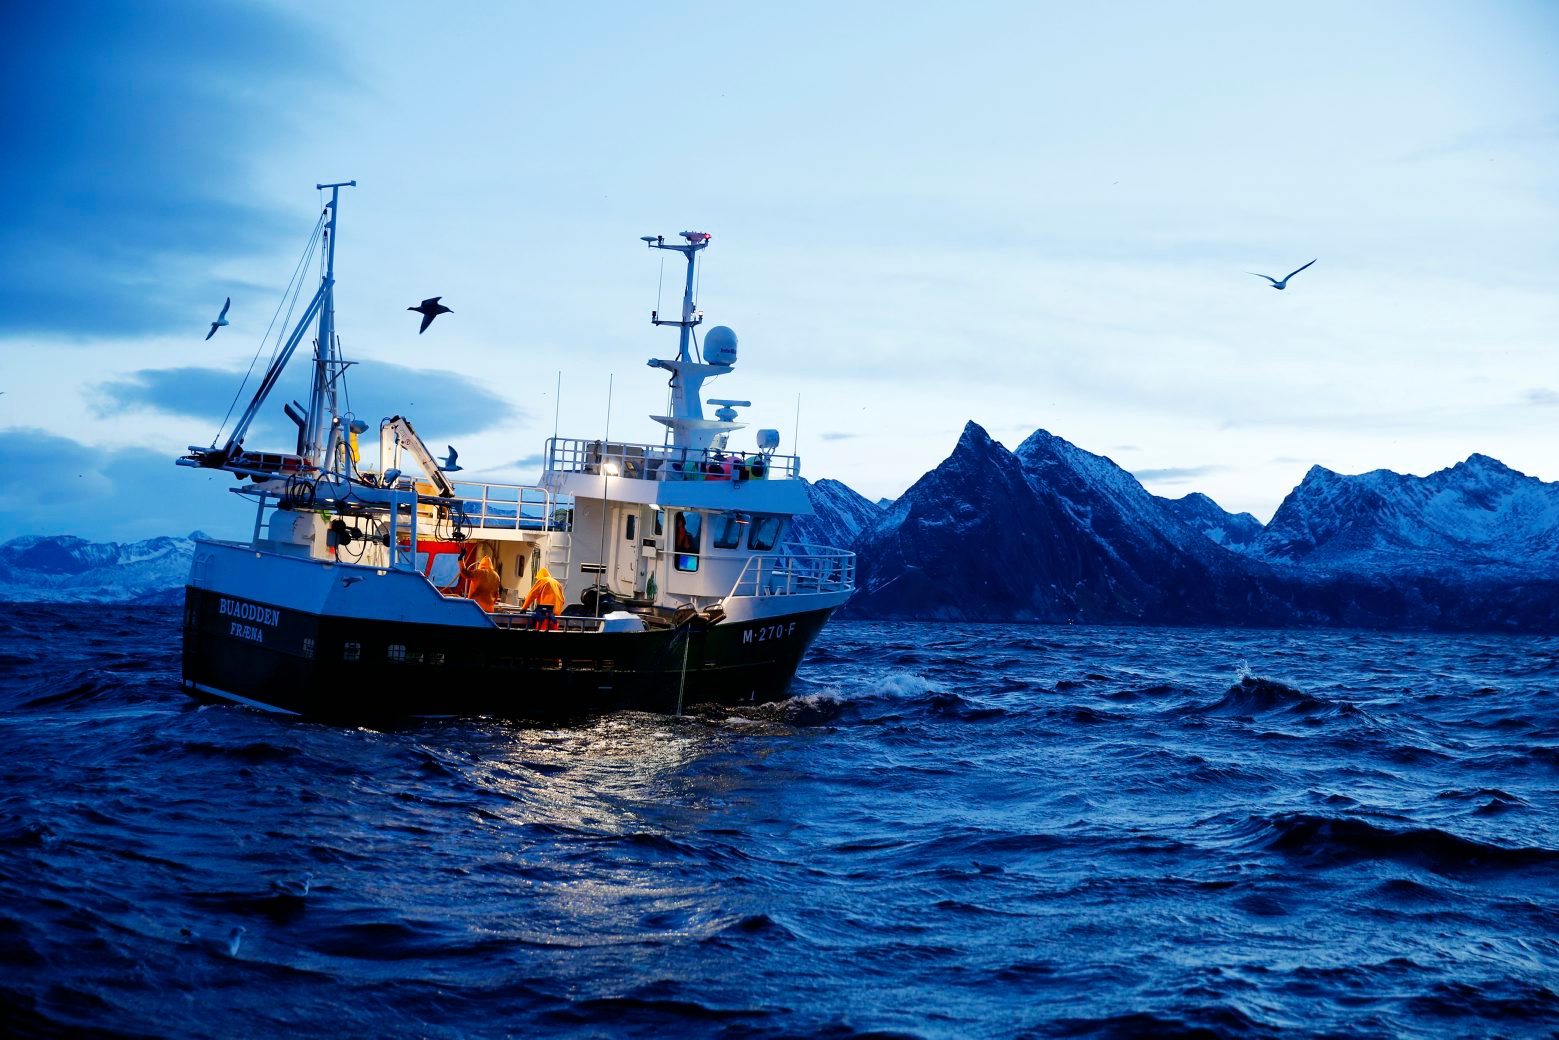 FILE - This is a Jan 1  2016 file photo of  Jan Gunnar Johansen and Trond Dalgard as they fish for cod from the vessel Buaodden in the Norwegian Sea near Gryllefjord, northern Norway. Ahead of a June 23 referendum on whether to quit the European Union, Britons are looking across the North Sea to Norway for clues on what life could be like outside the bloc. The oil-rich Norwegians clearly have done OK. A free-trade deal ensures they enjoy almost the same access to the union's giant market as had they been EU members. (Cornelius Poppe / NTB scanpix via ) NORWAY OUT NORWAY BRITAIN EU